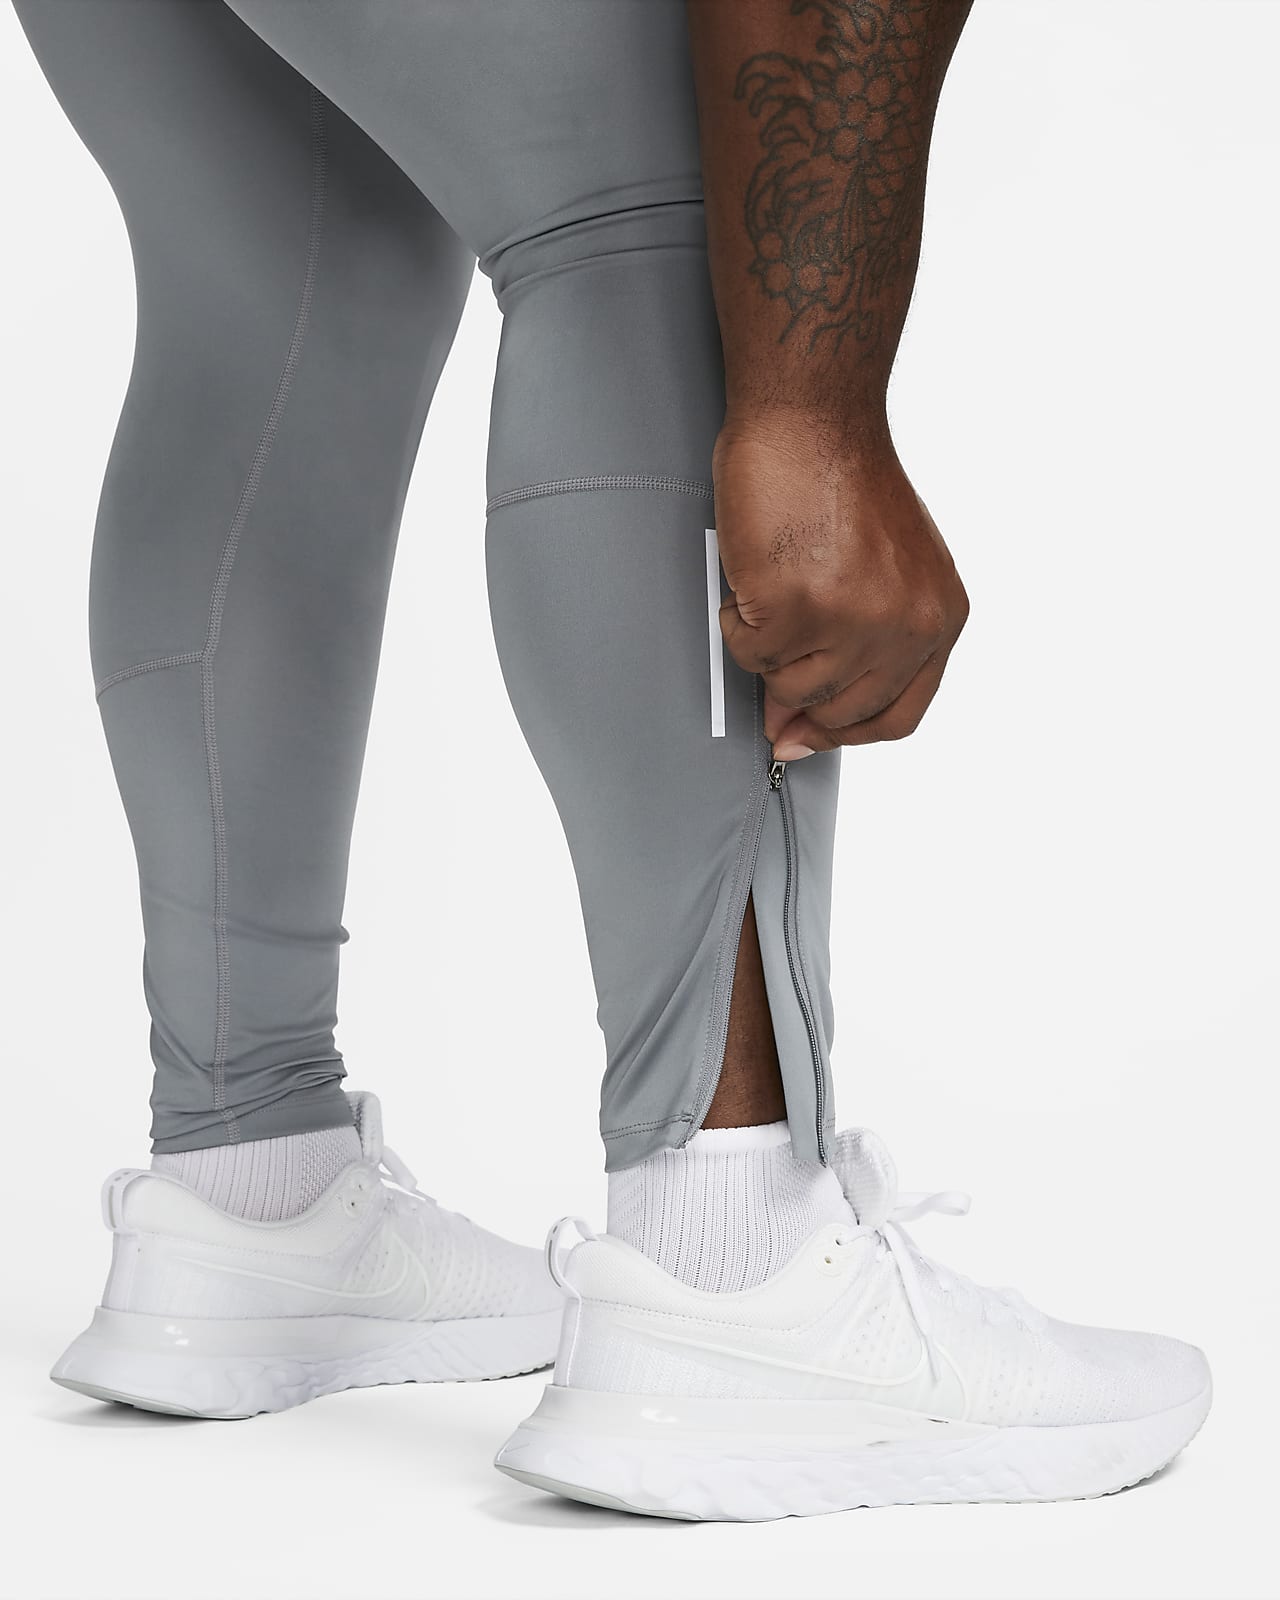 Jogging Nike Dri-FIT Challenger - Pants / Jogging suits - The Stockings -  Mens Clothing